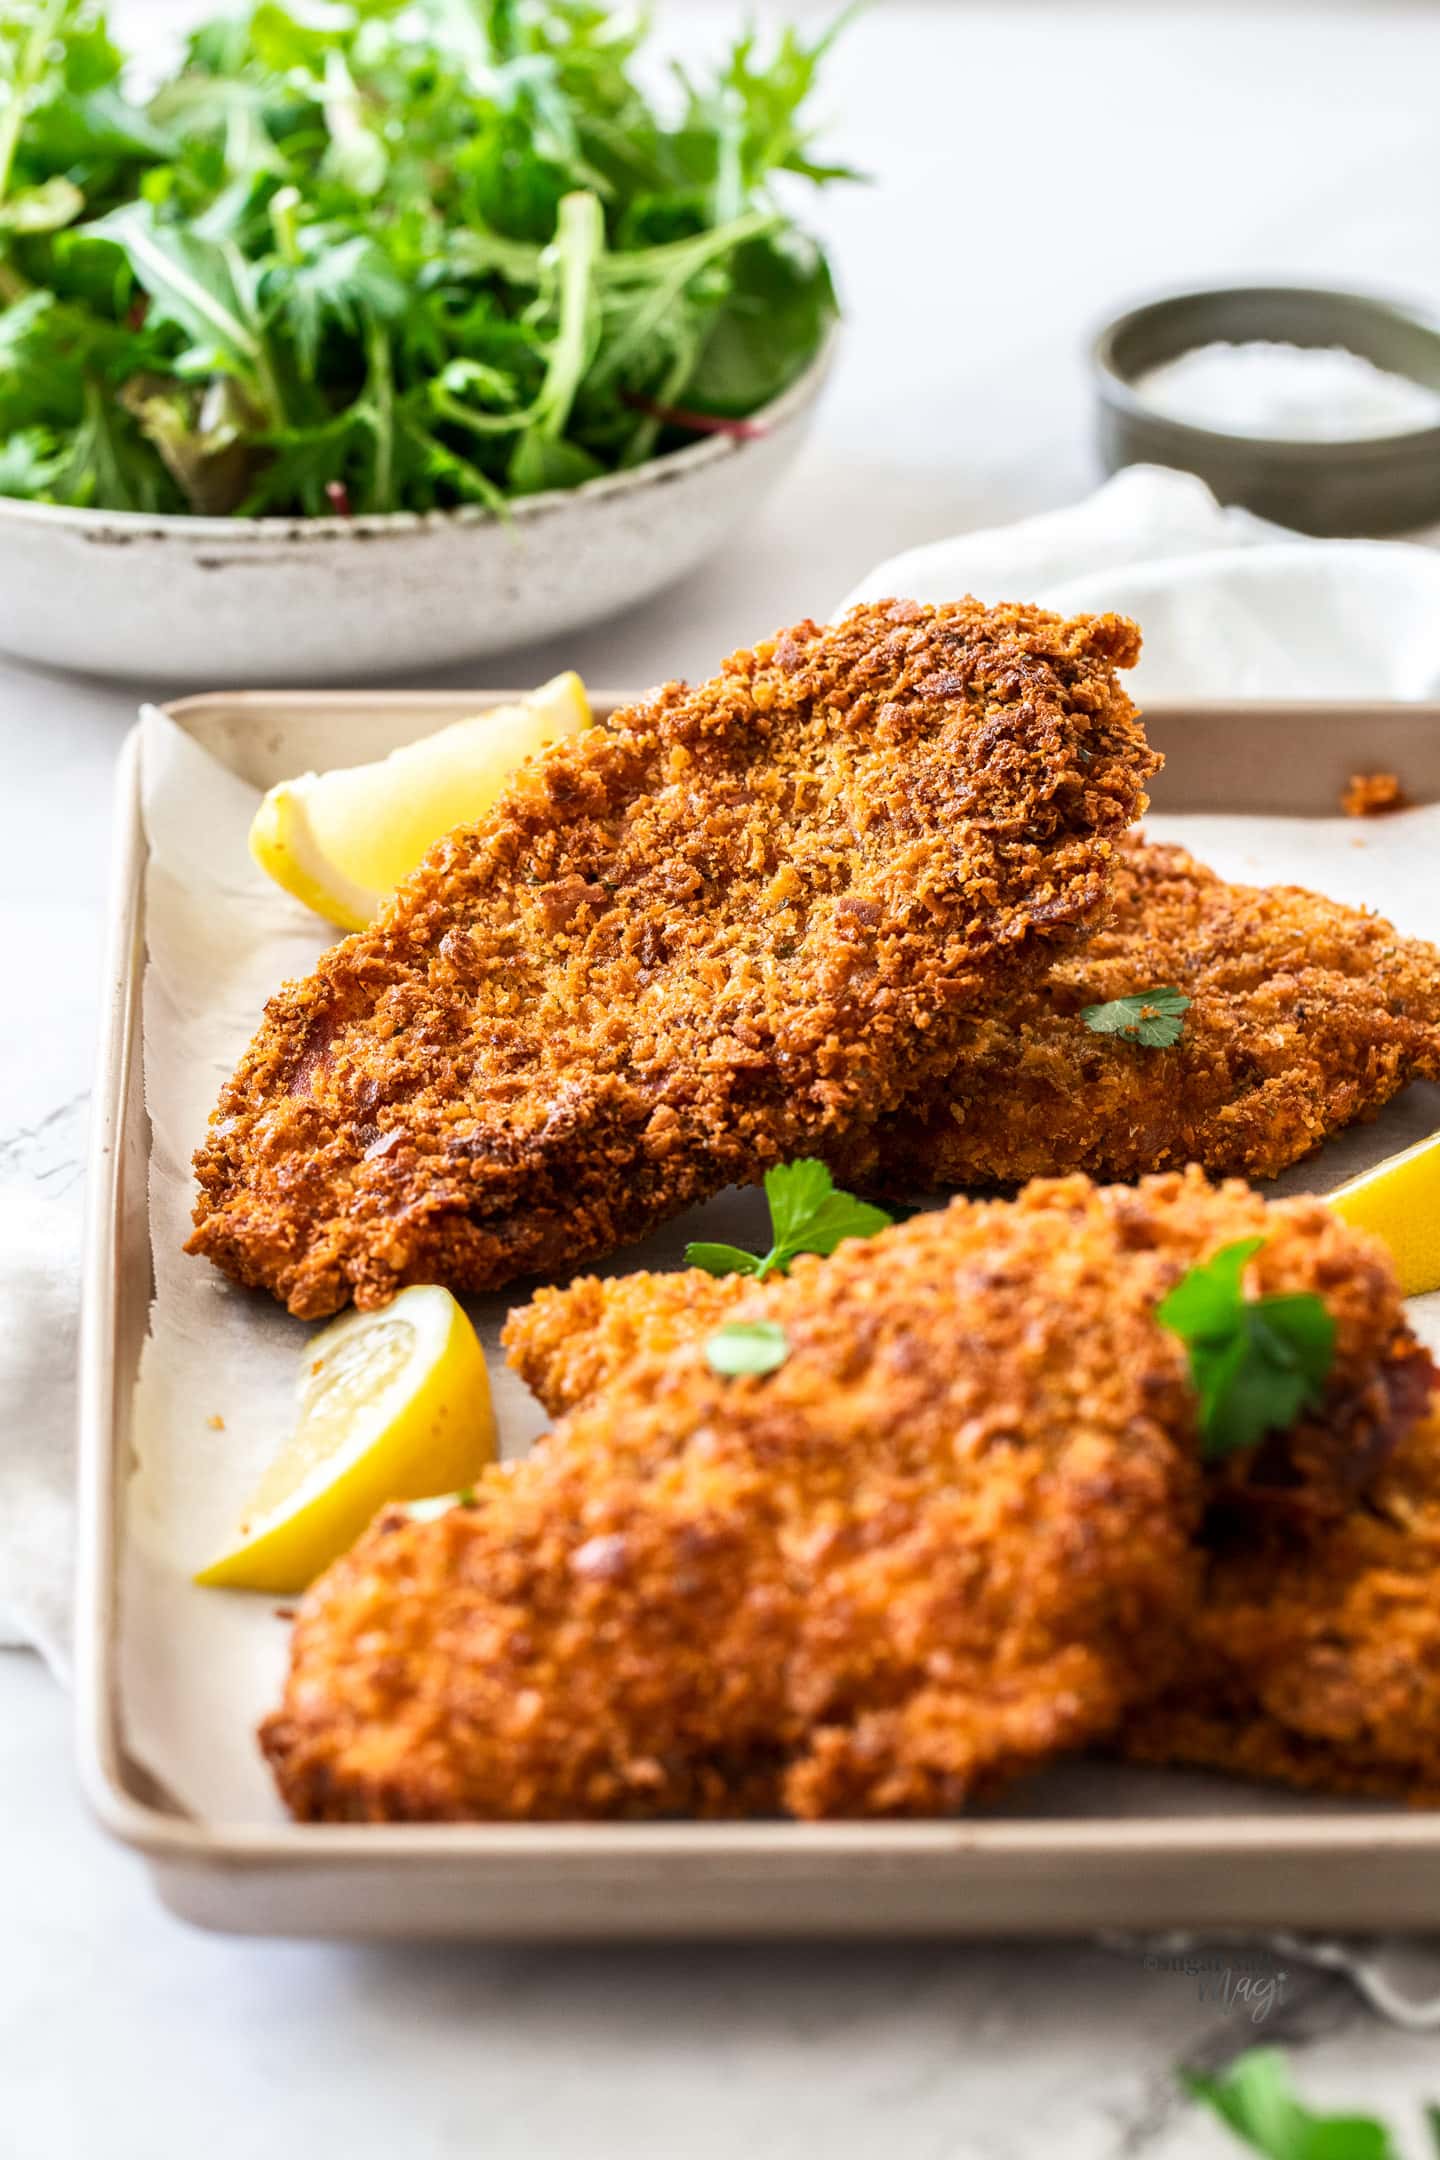 Crunchy golden brown schnitzels on a baking tray with lemon wedges.